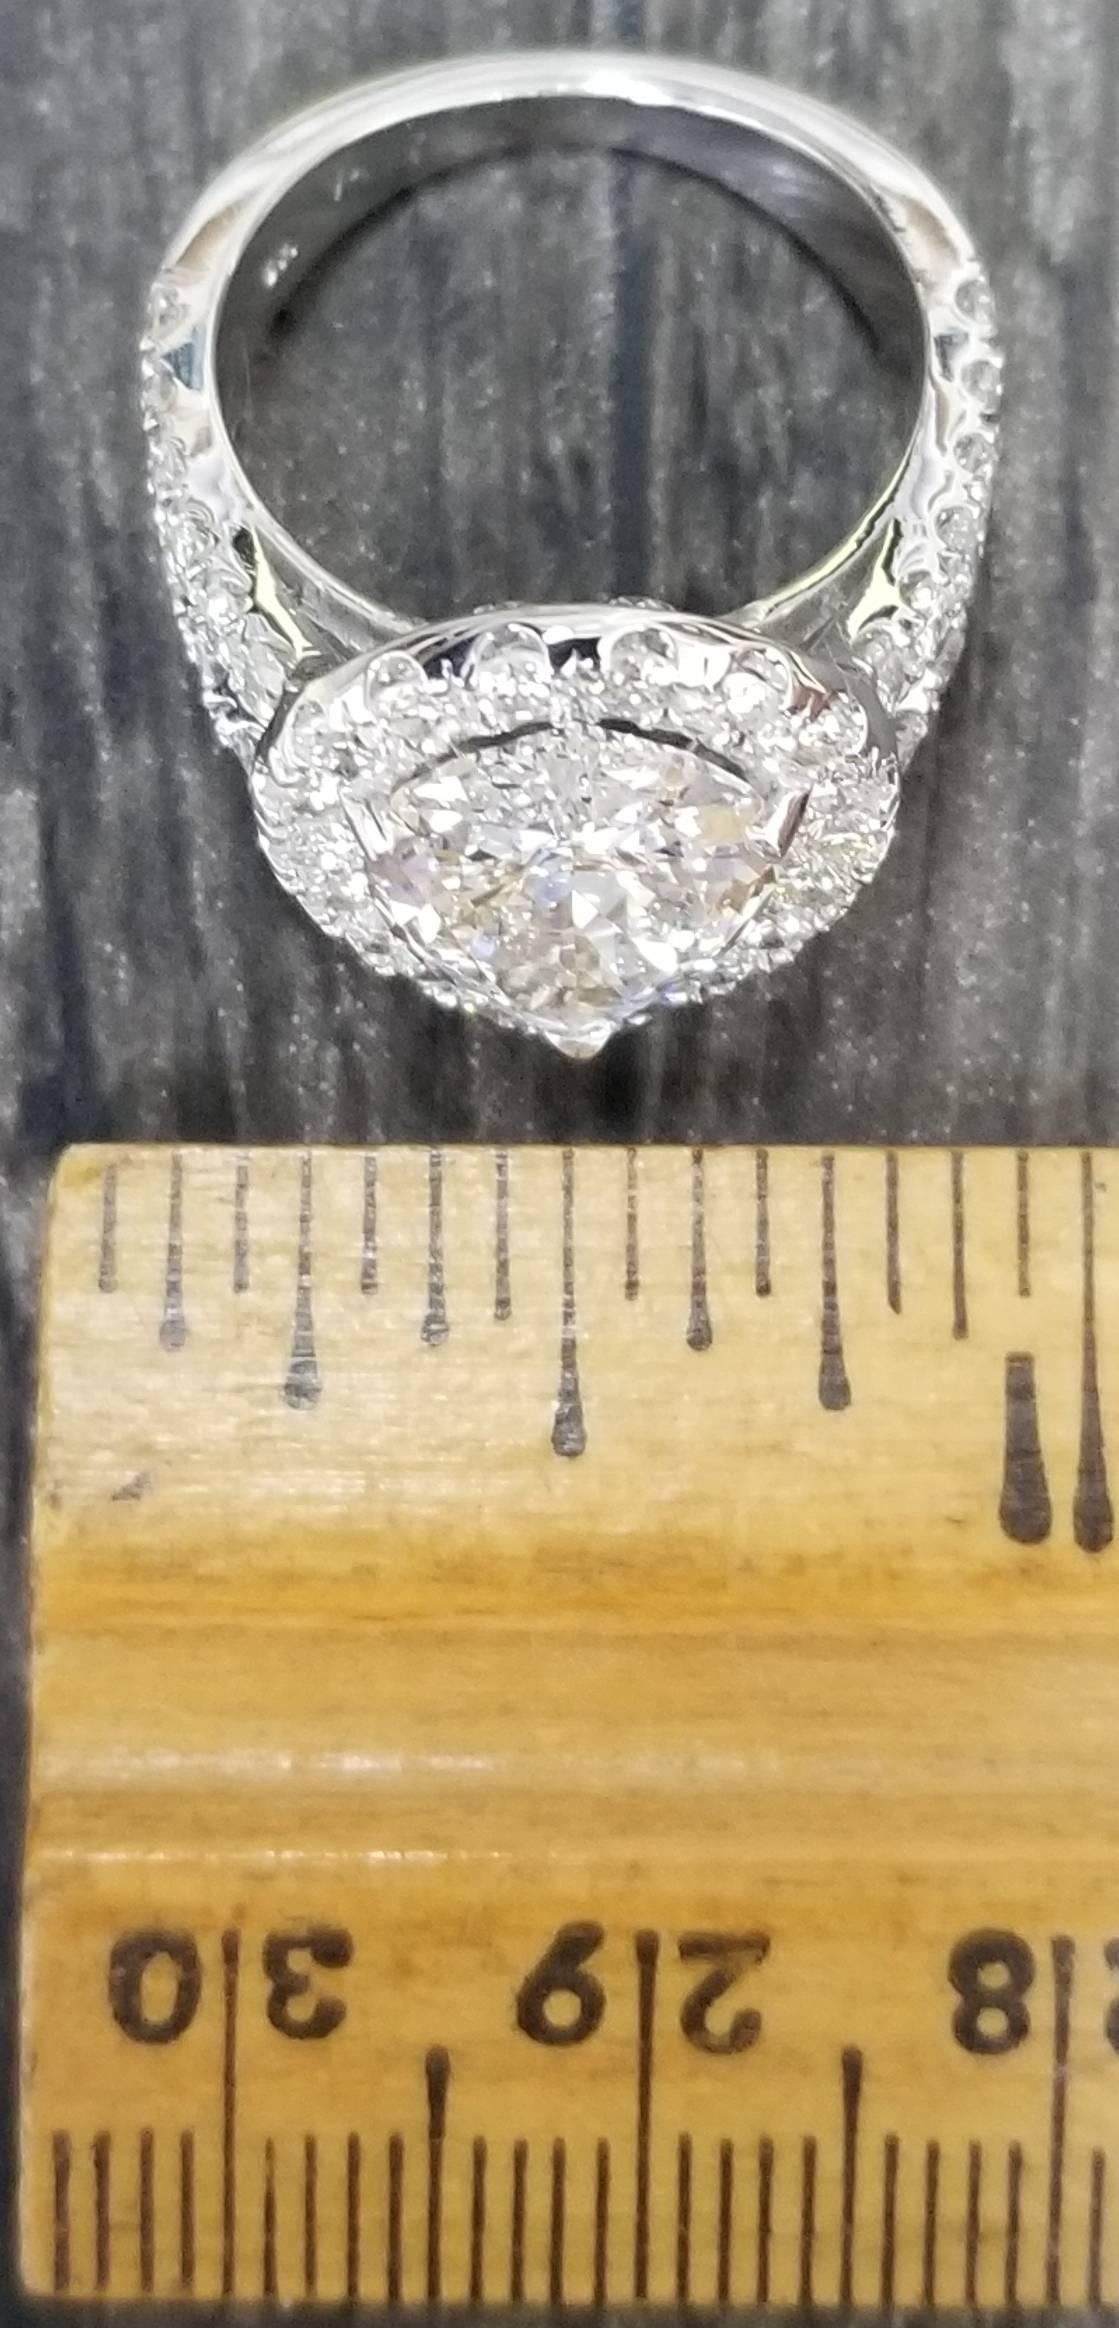 6.00 Carat Ring with GIA Certified Pear Shape Cut 3.65 Carat 